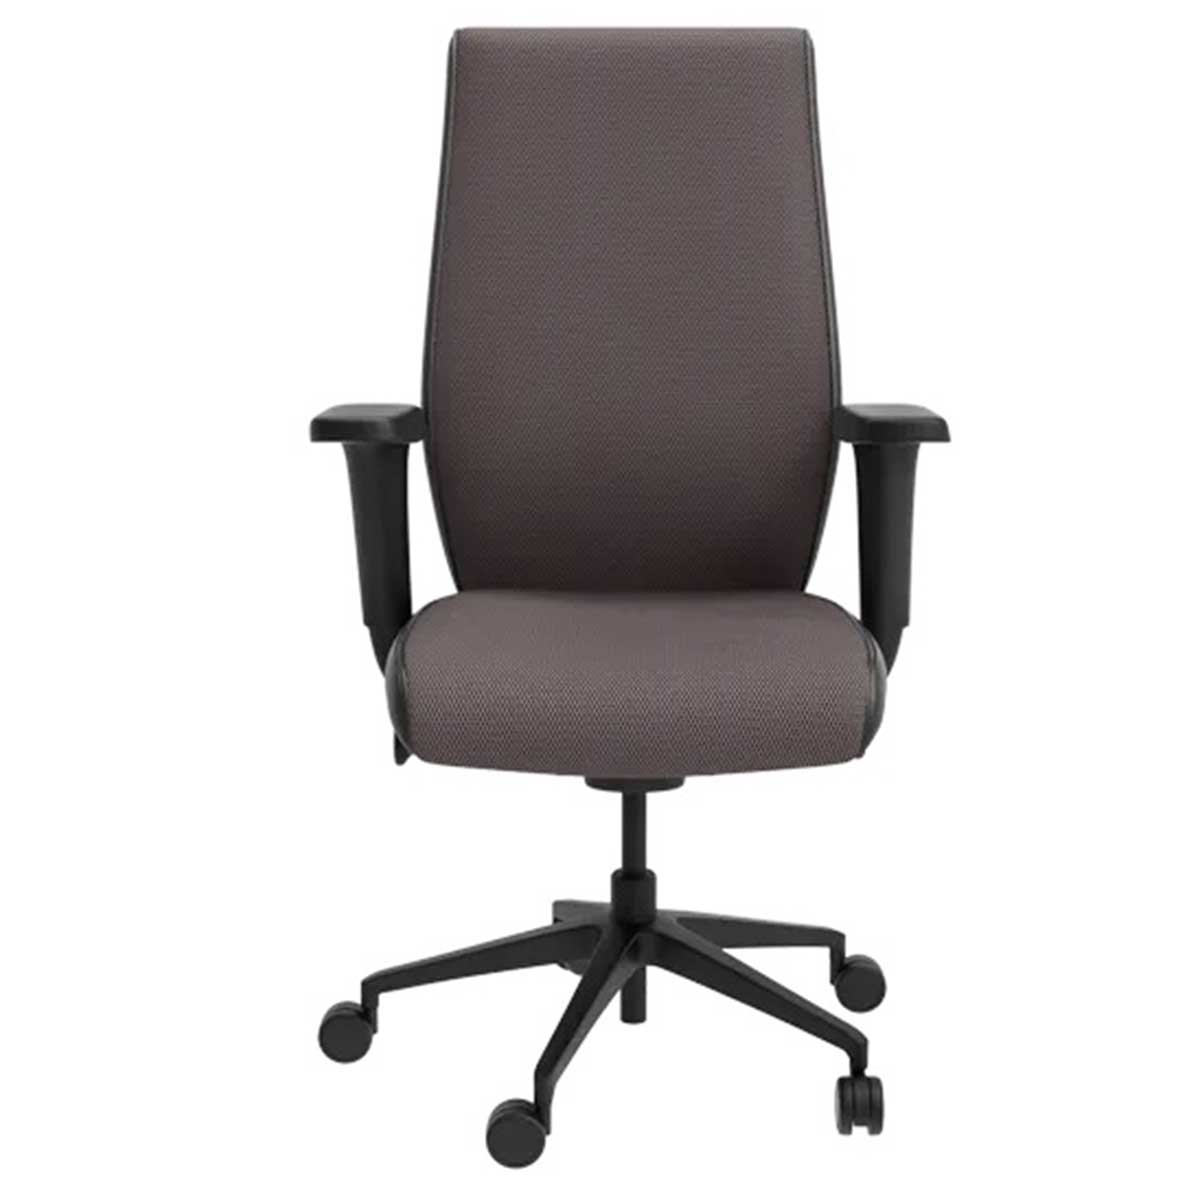 Workstation Chair Manufacturers, Suppliers in Greater Kailash Ii